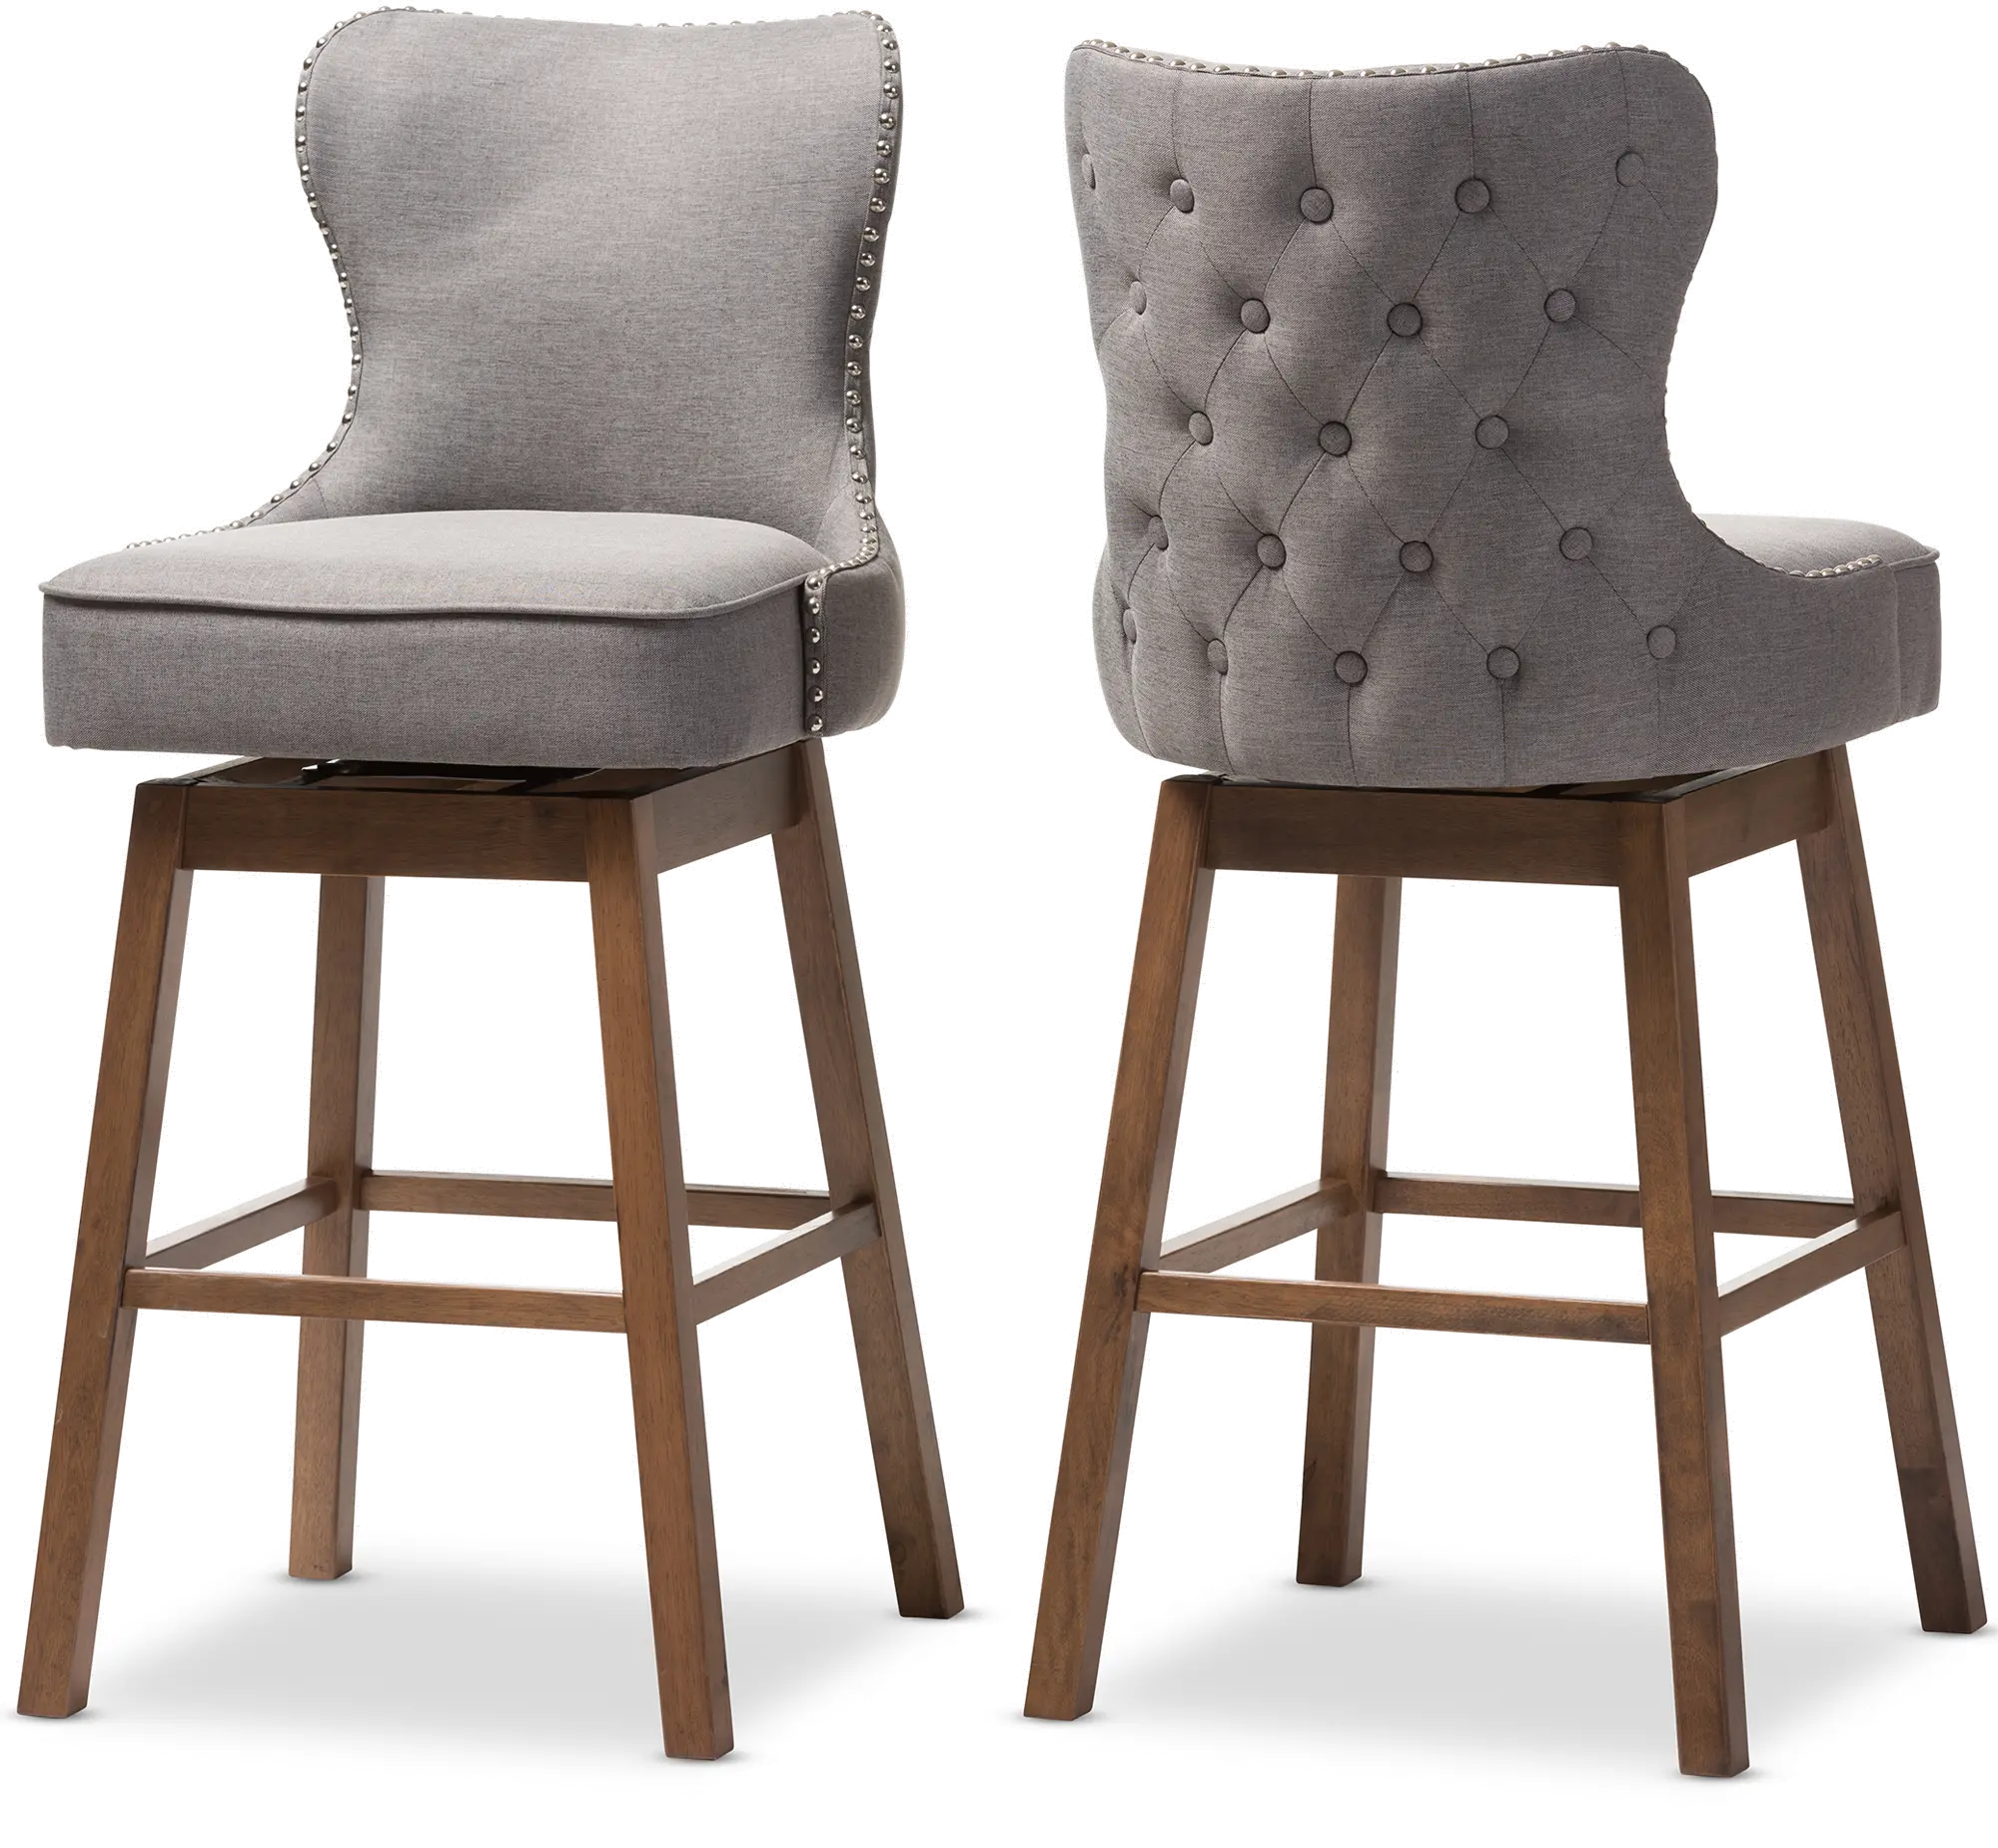 Furniture of America Ackfel 46 in. Satin Plated and Navy High Back Metal Extra Tall Foot Rest Cushioned Bar Stools (Set of 2)